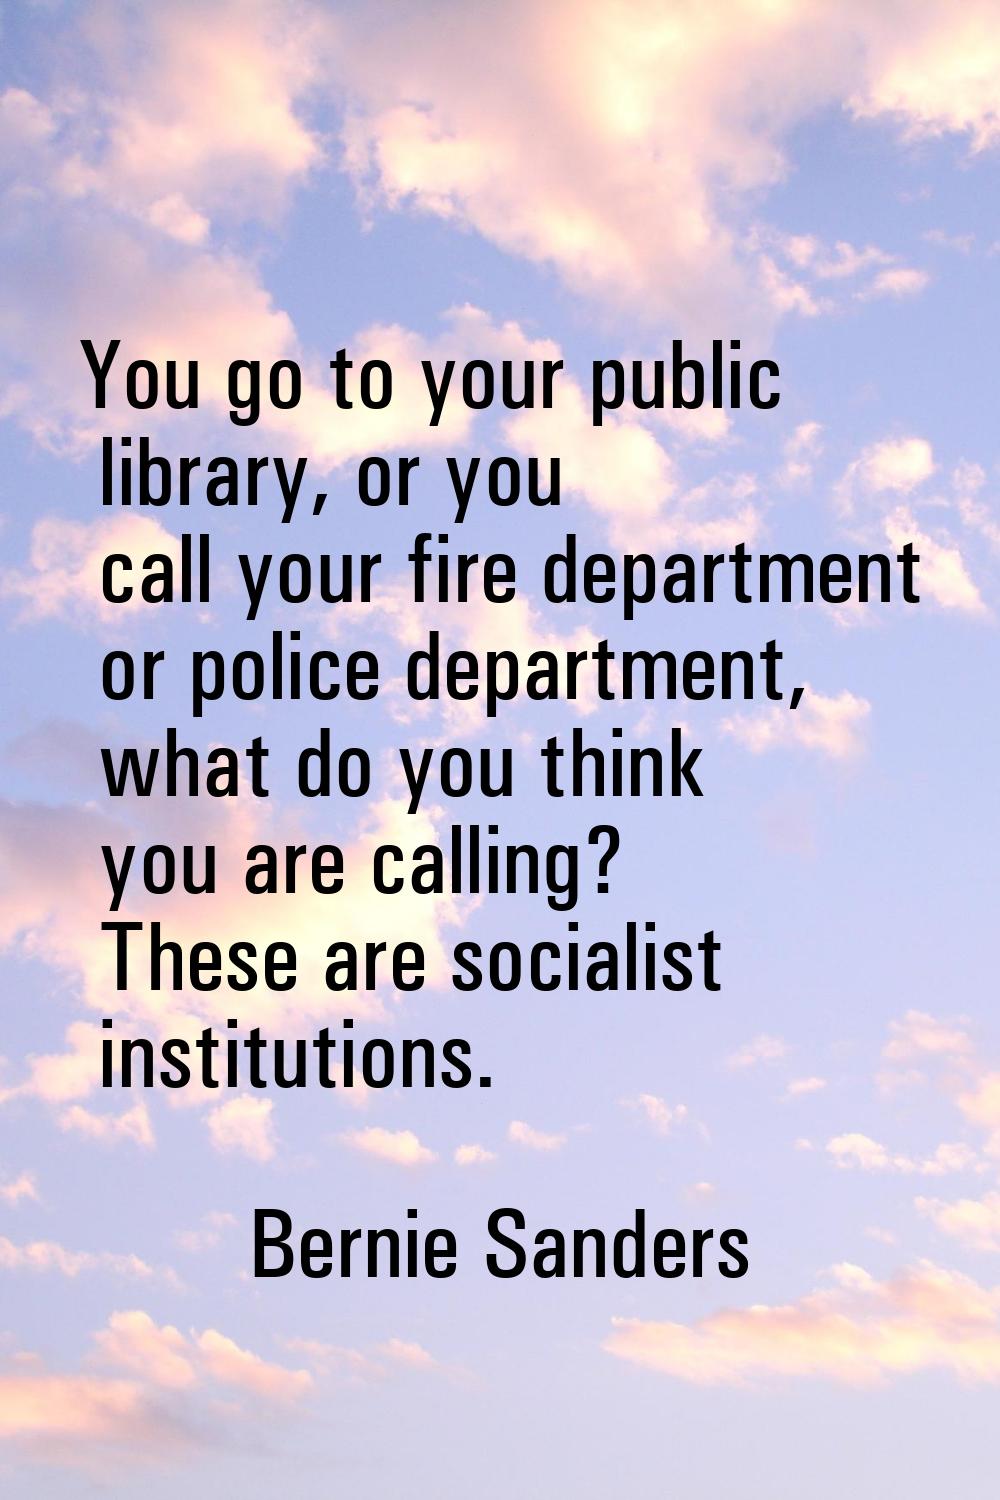 You go to your public library, or you call your fire department or police department, what do you t